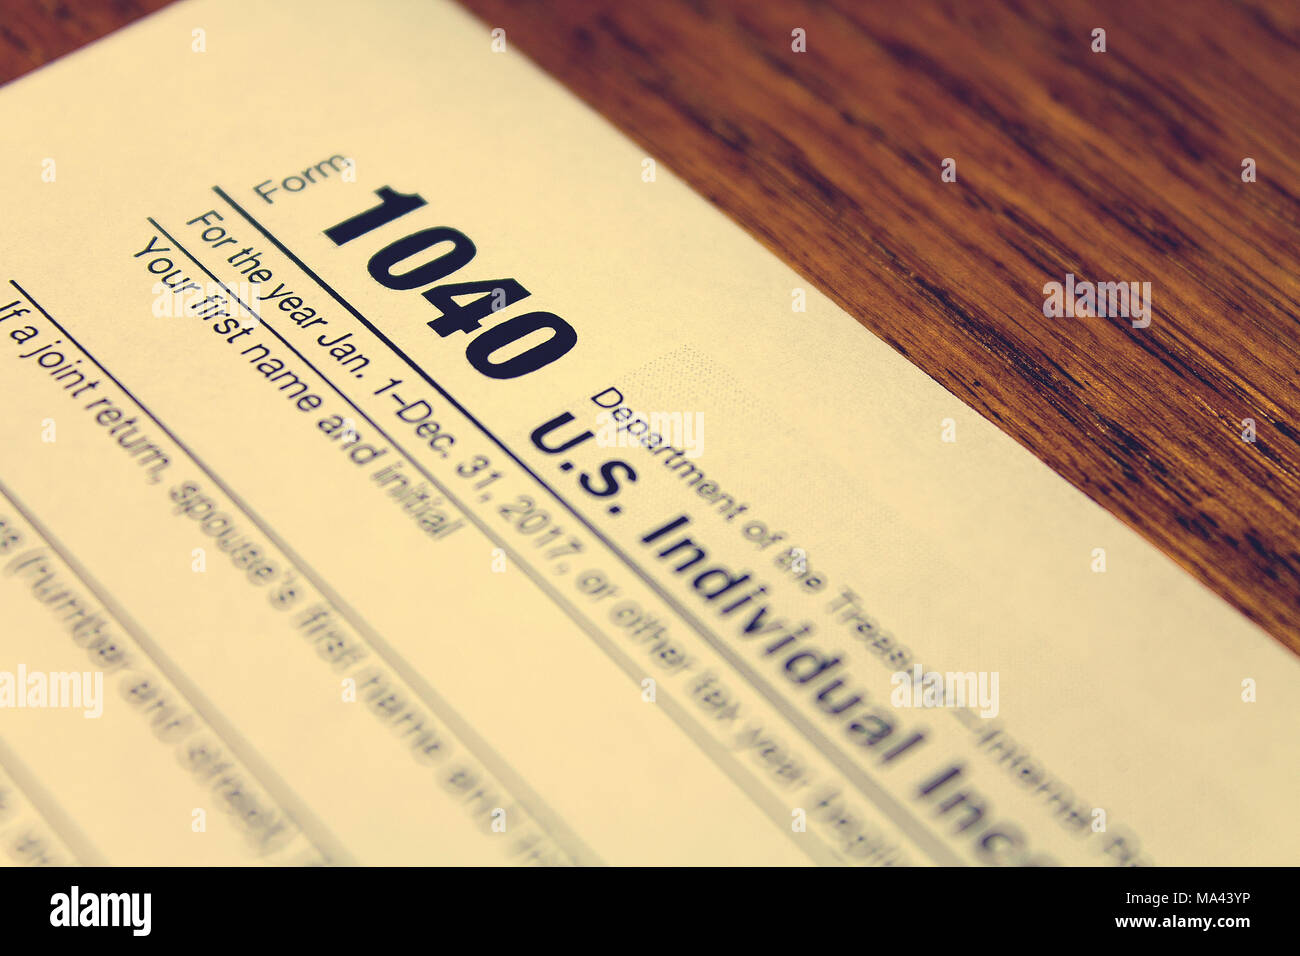 Tax day. The tax form 1040 is on a wooden table. Stock Photo